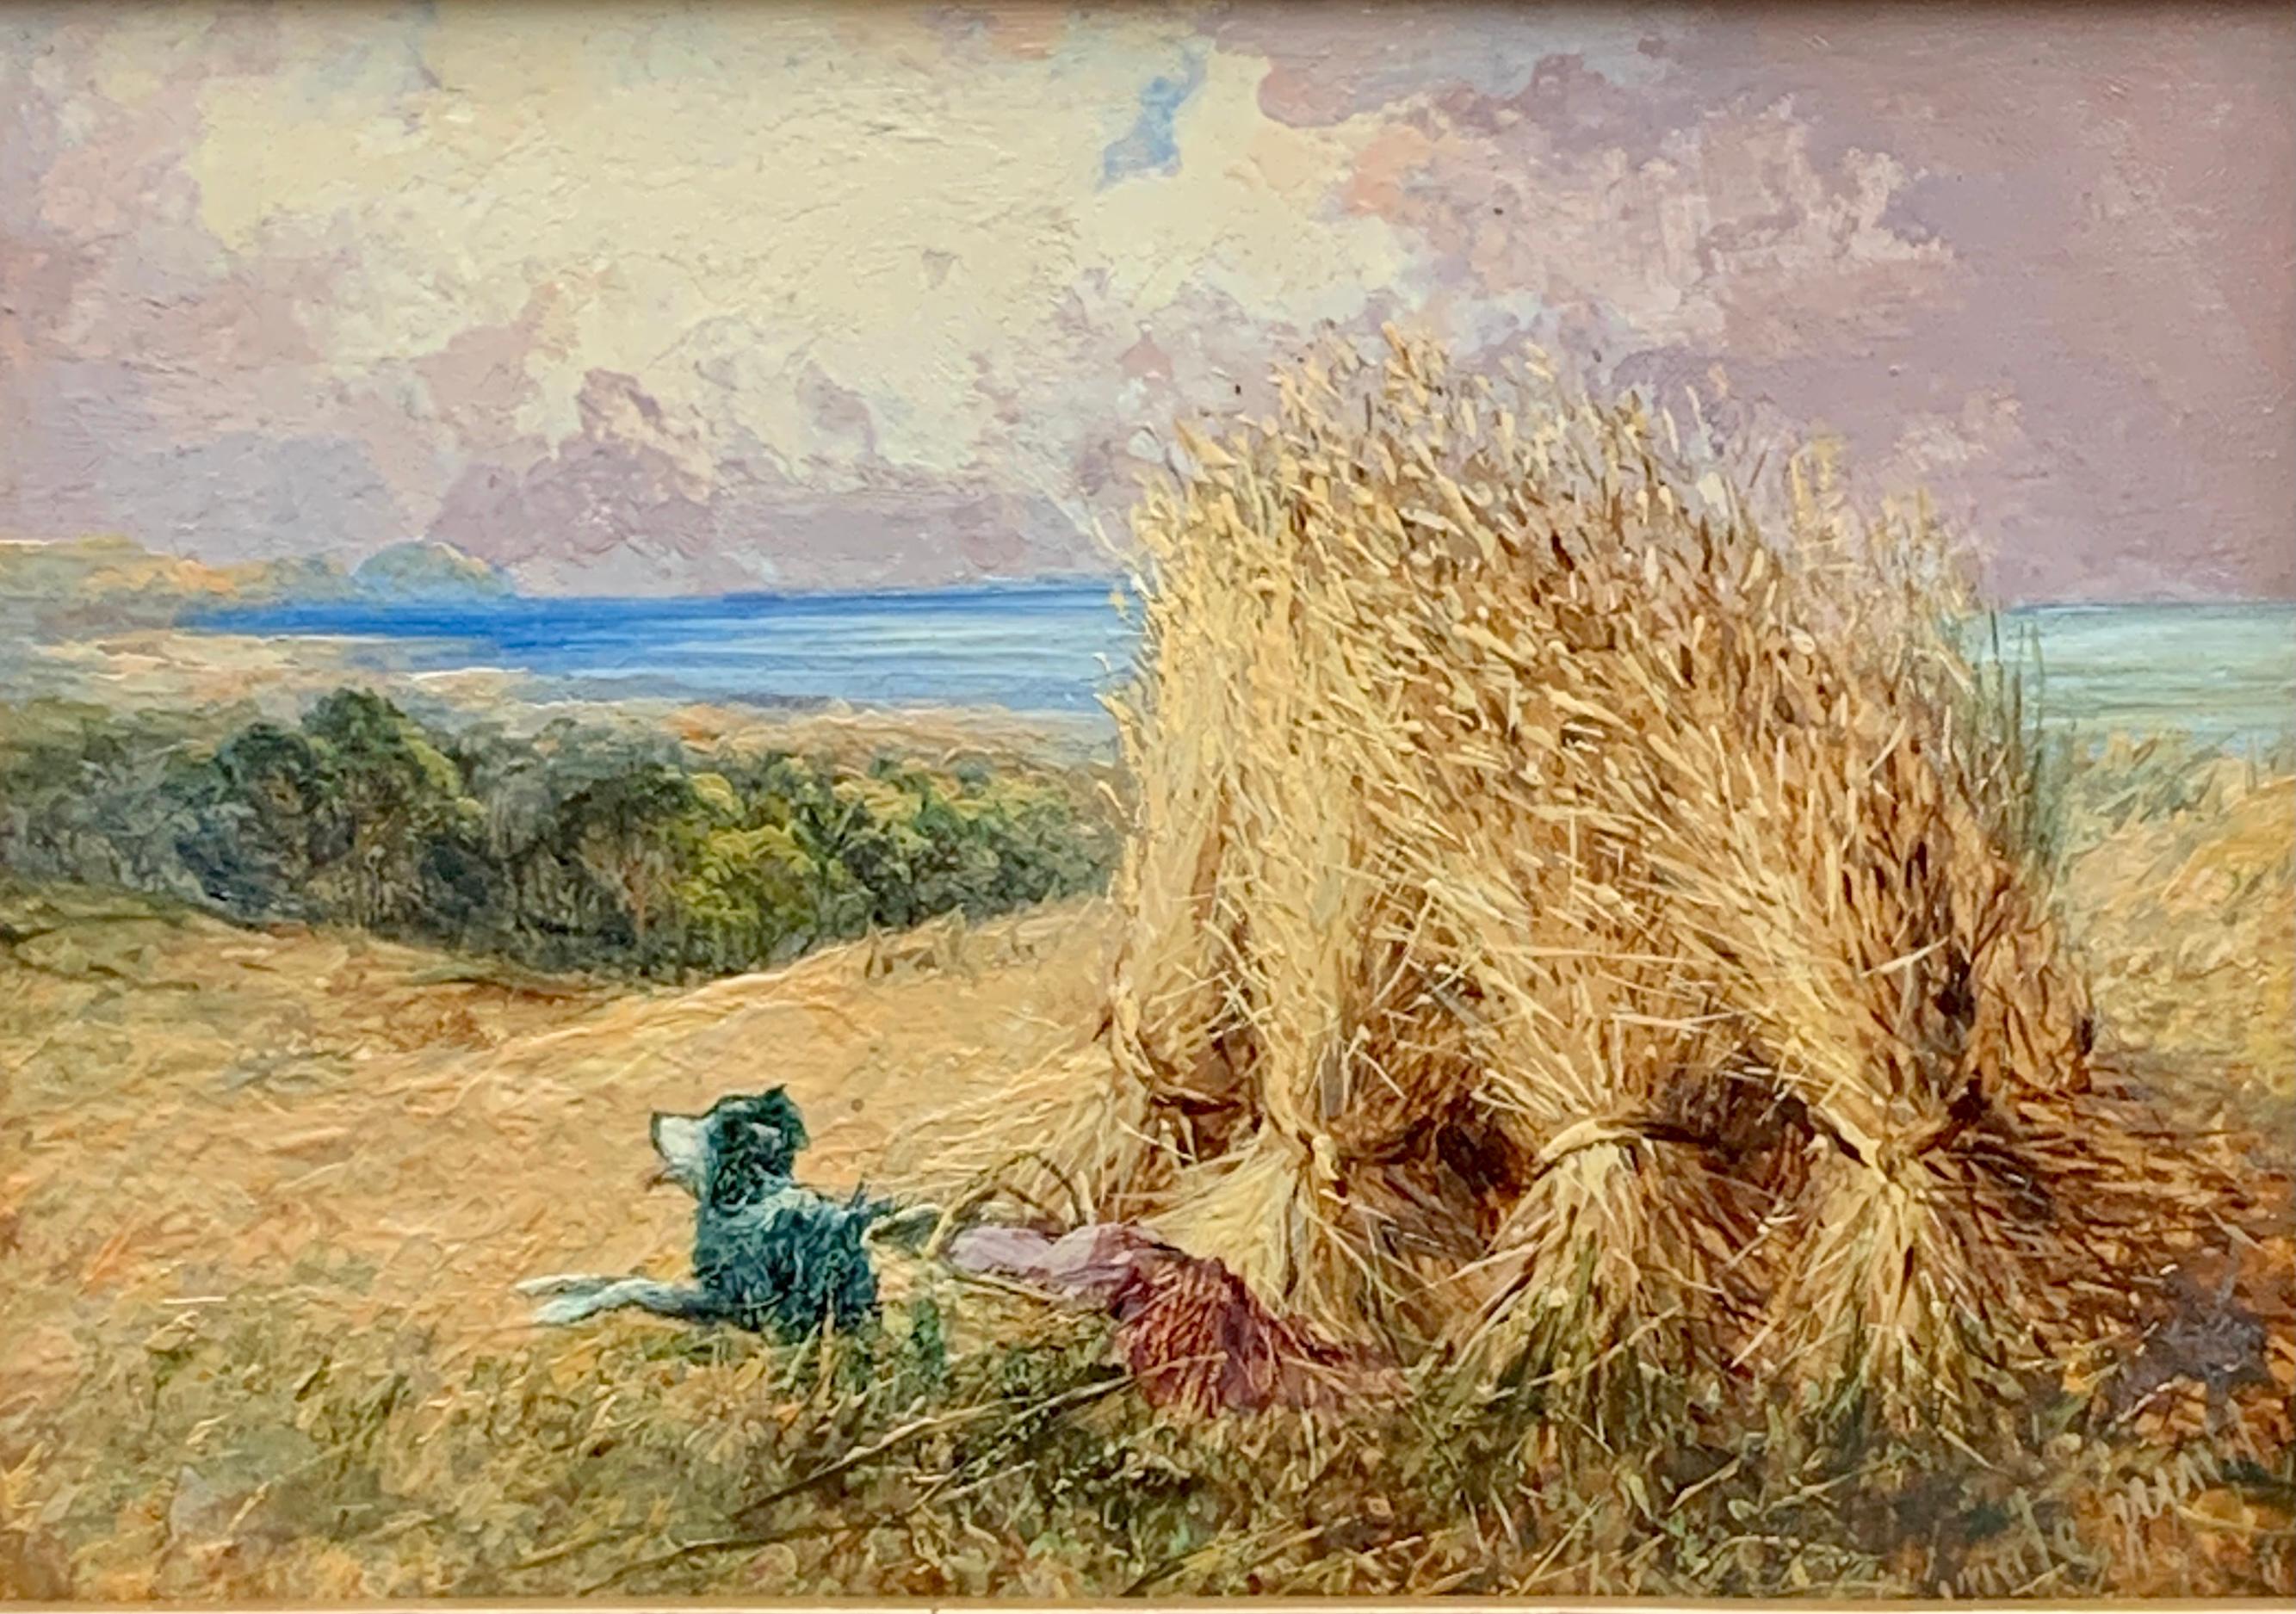 Antique English Harvest landscape with corn stacks, dog and view of the sea - Painting by Thomas Dingle Junior